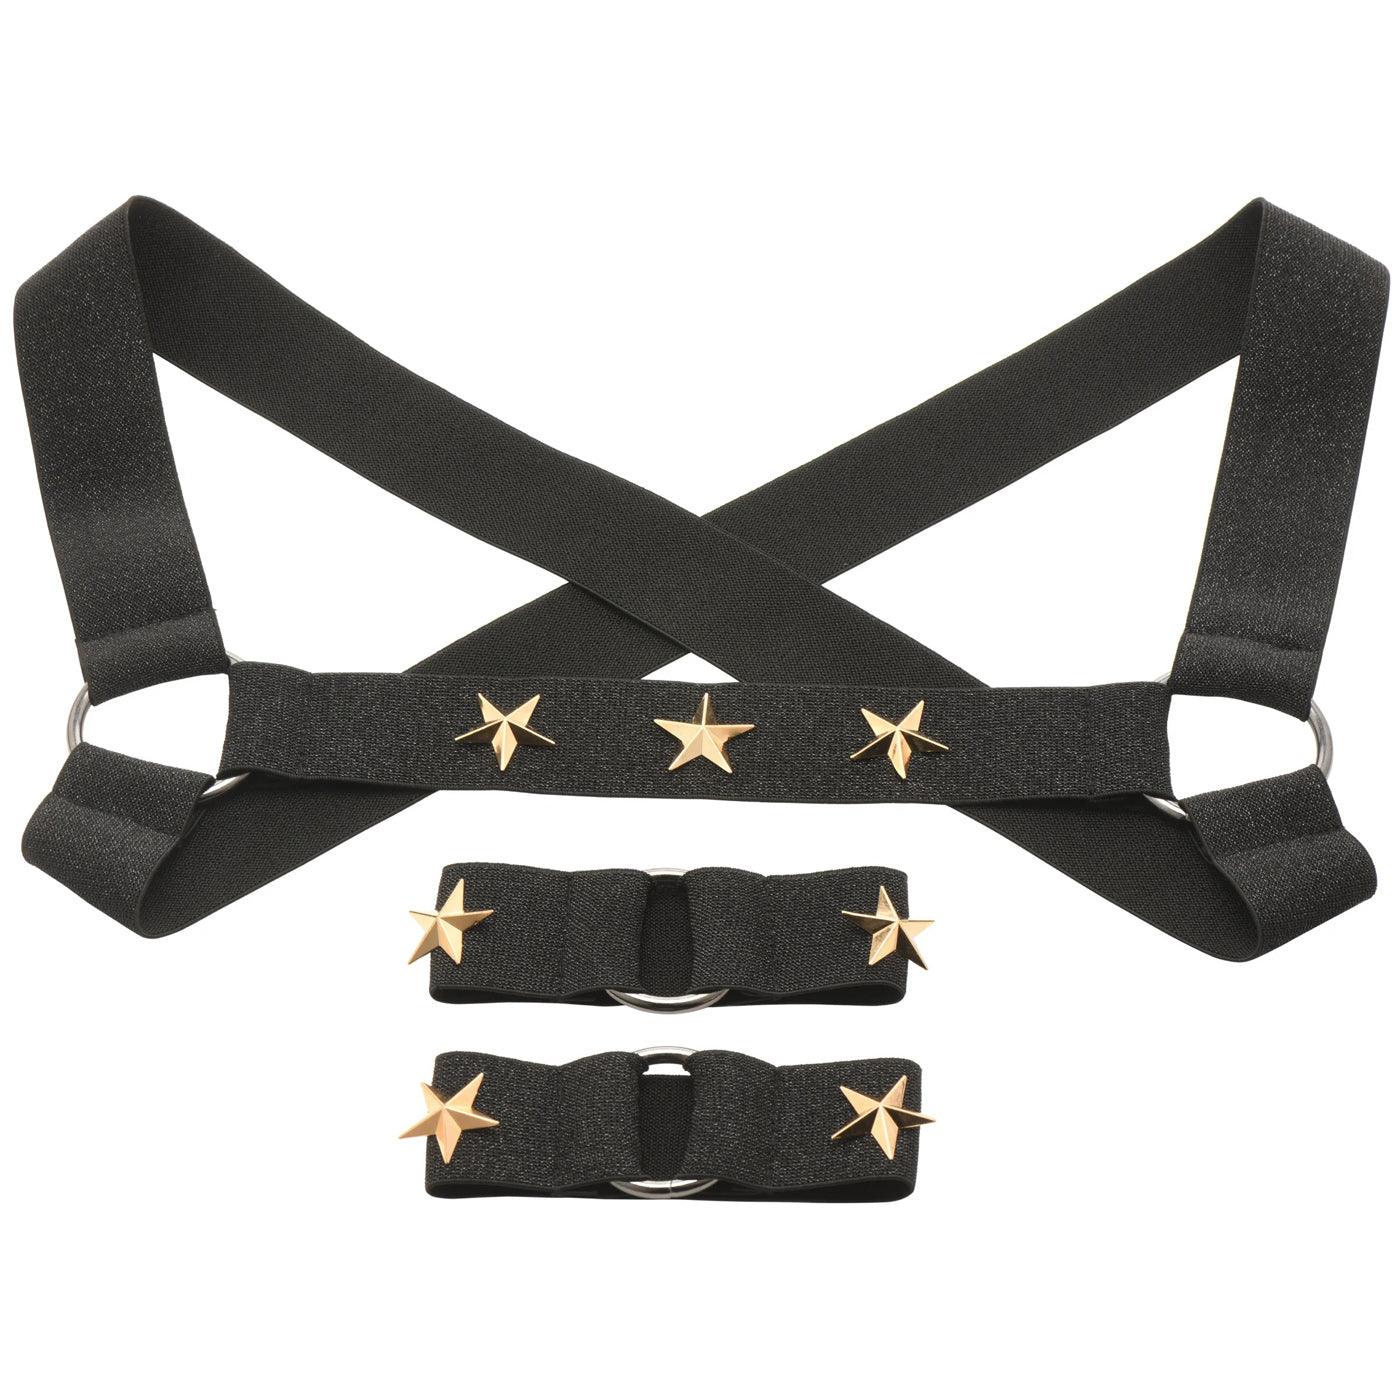 Star Boy Male Chest Harness With Arm Bands - Small/medium - Black - My Sex Toy Hub